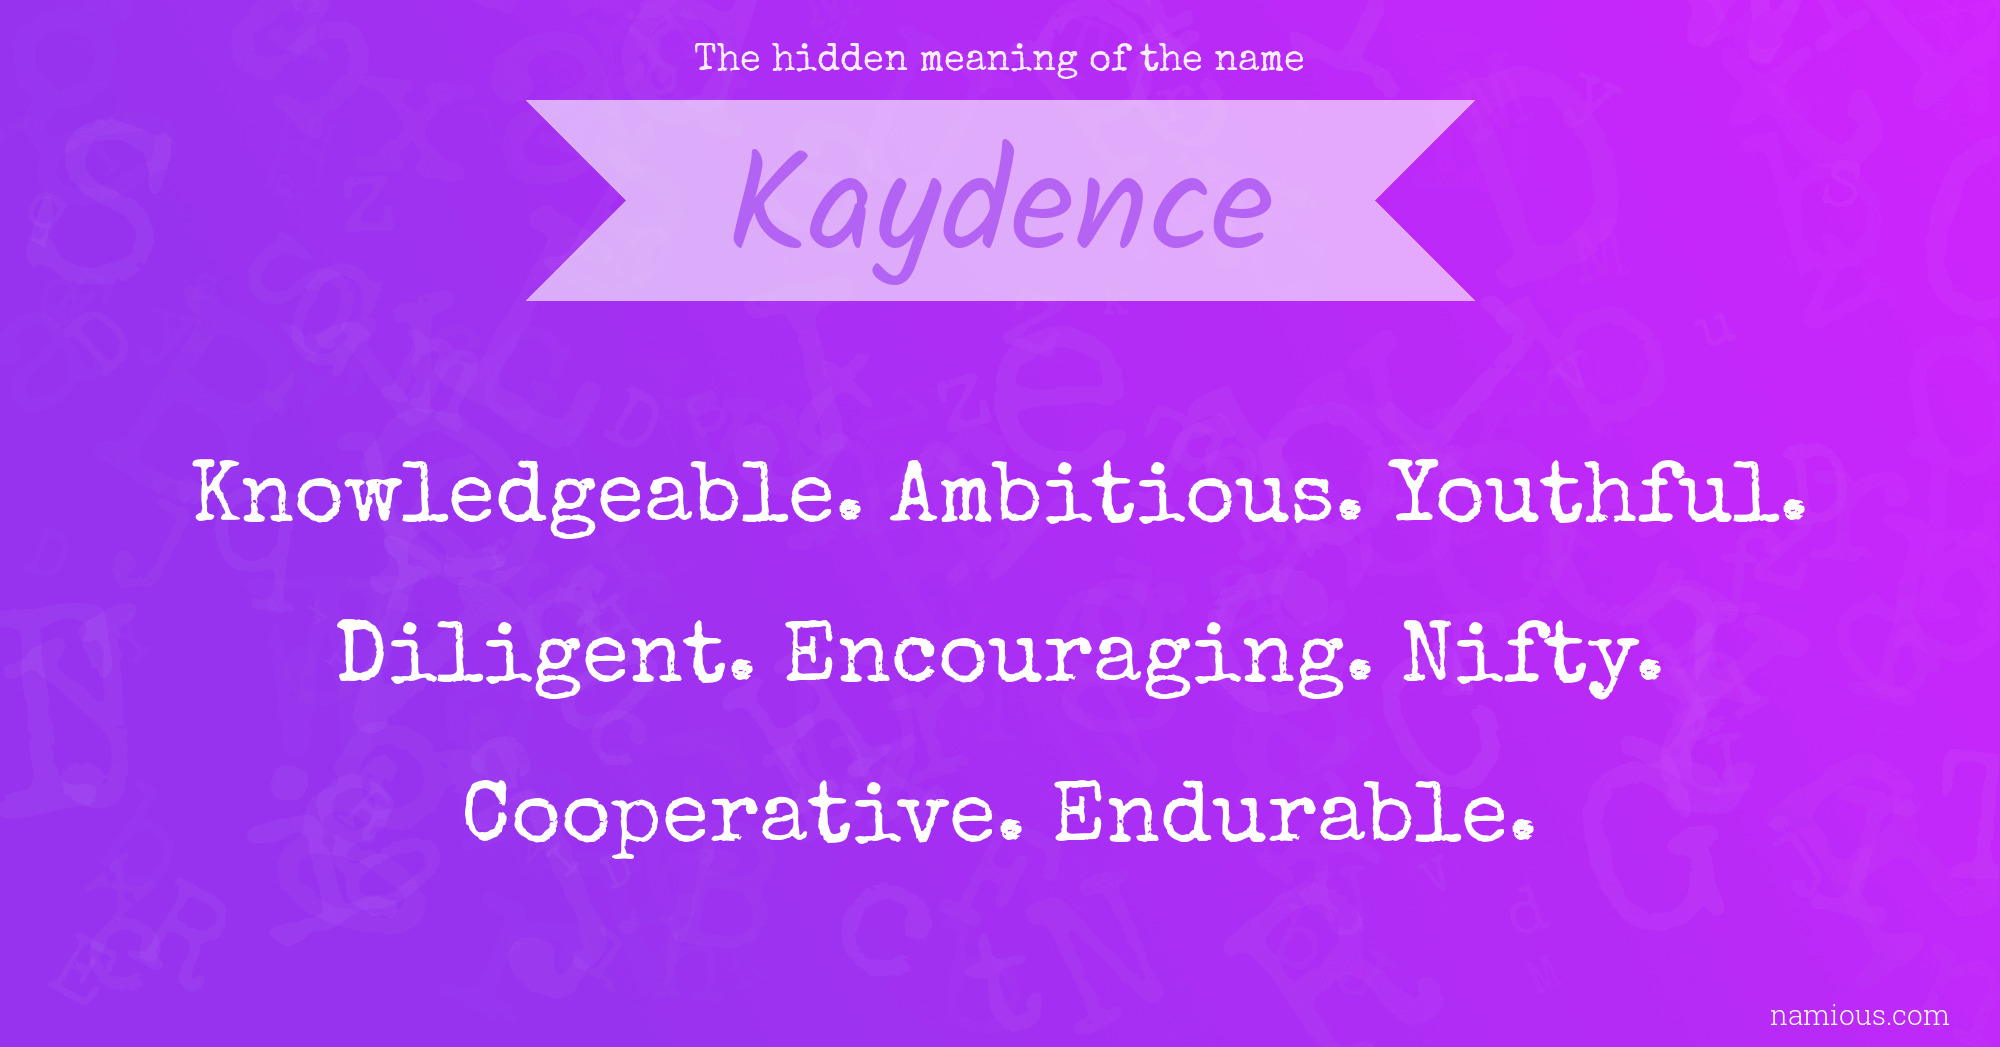 The hidden meaning of the name Kaydence